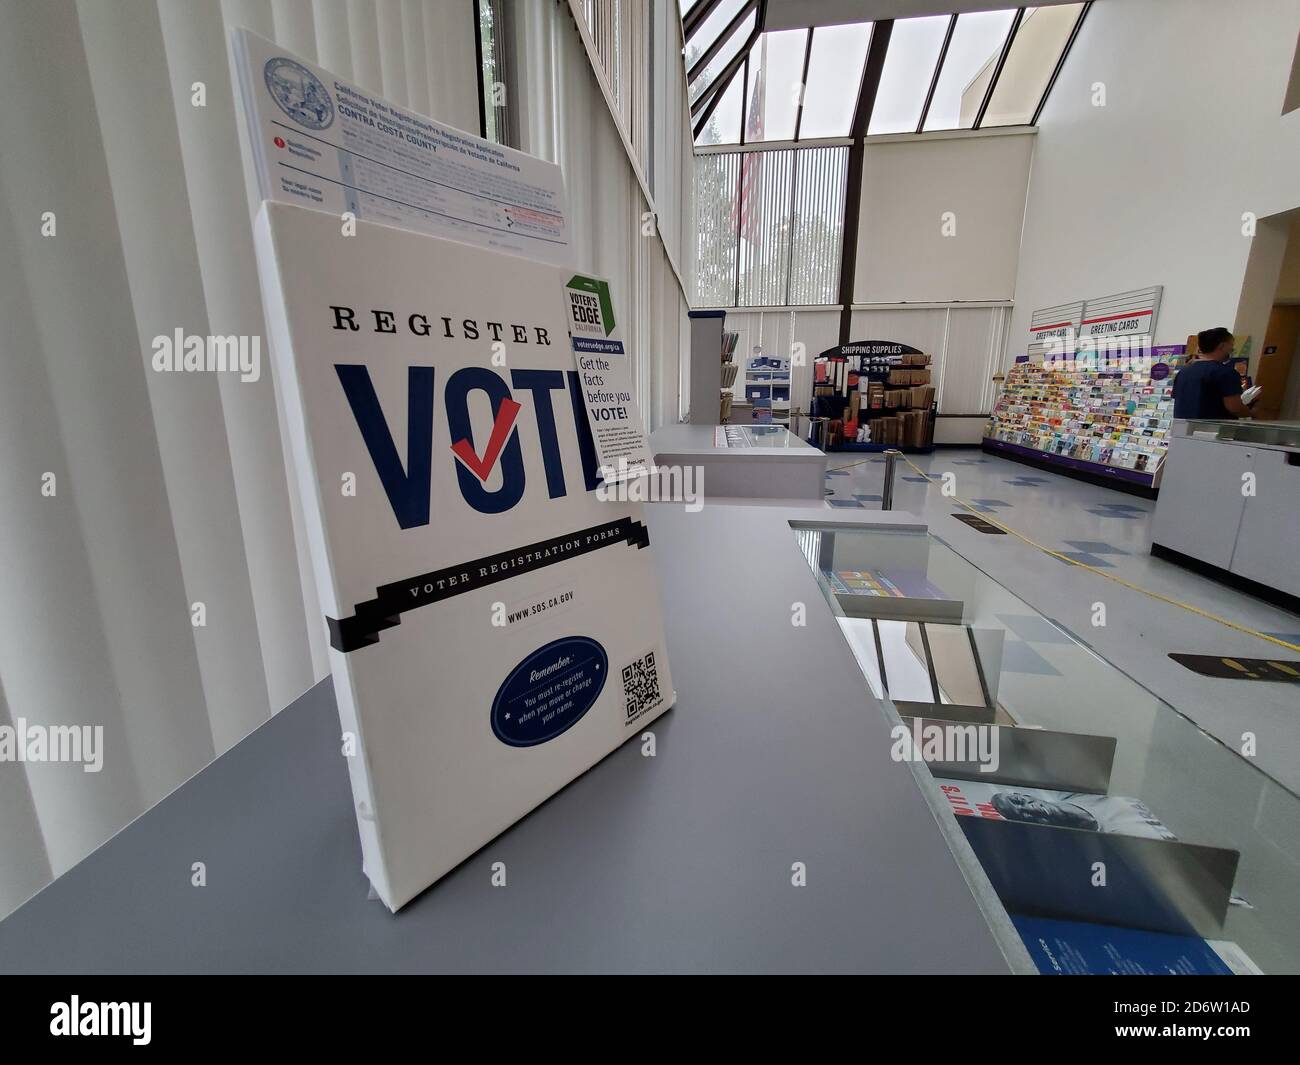 Sign with text reading Register to Vote and voter registration forms at United States Postal Service (USPS), San Ramon, California, September 14, 2020. () Stock Photo